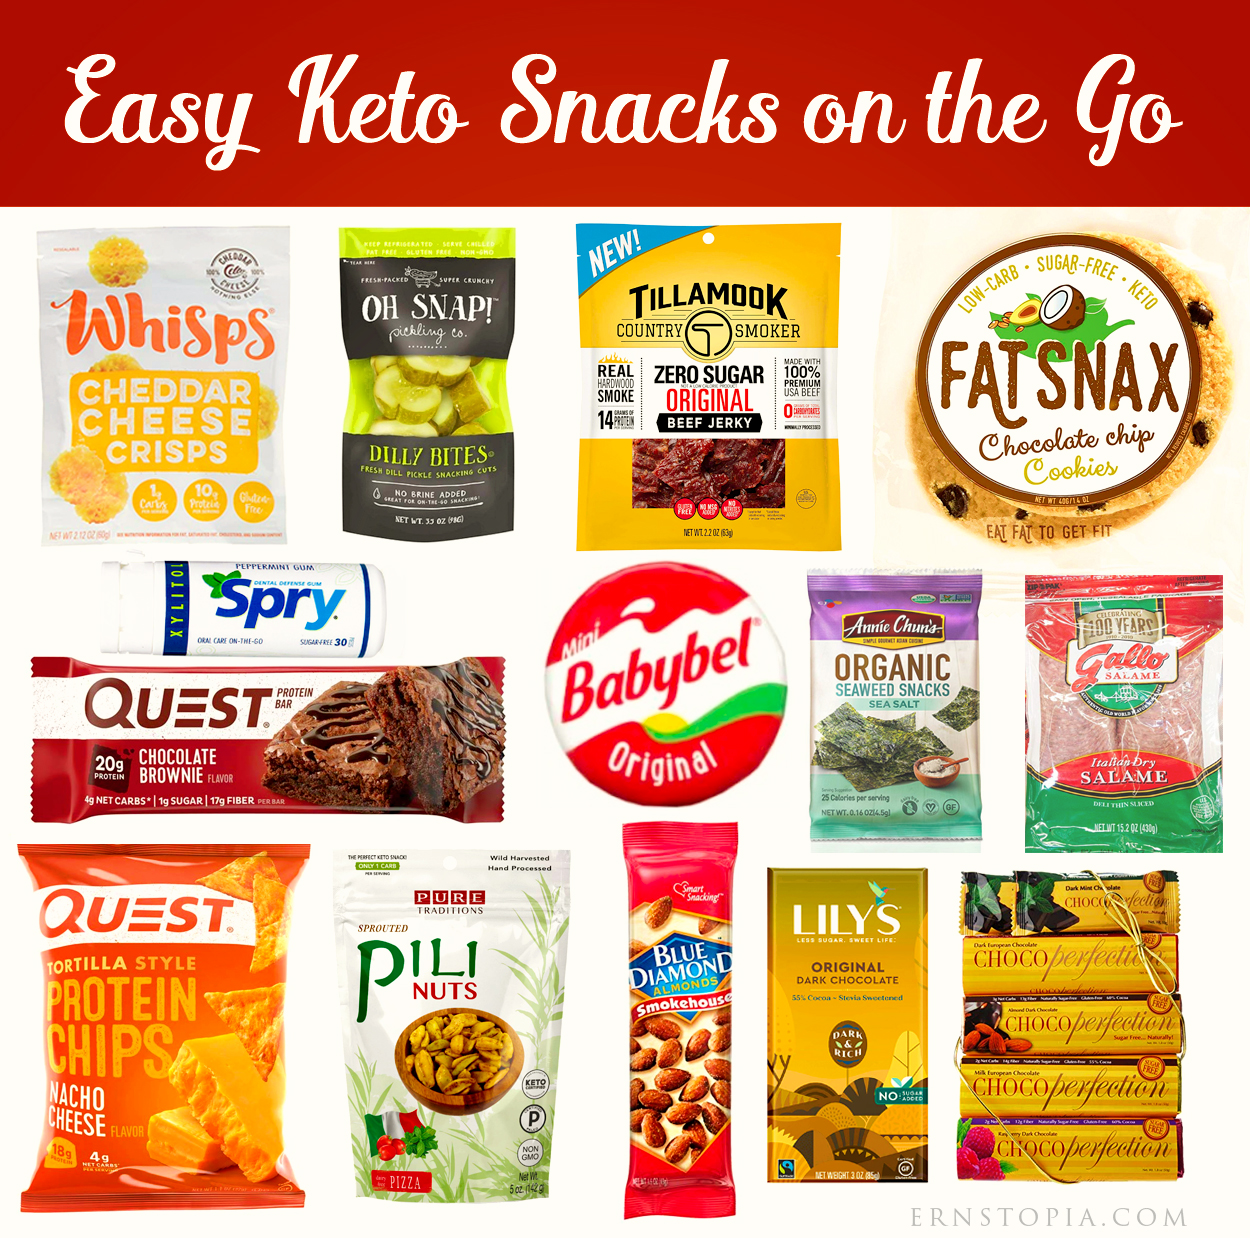 Convenient Keto Snacks when you're on the Go